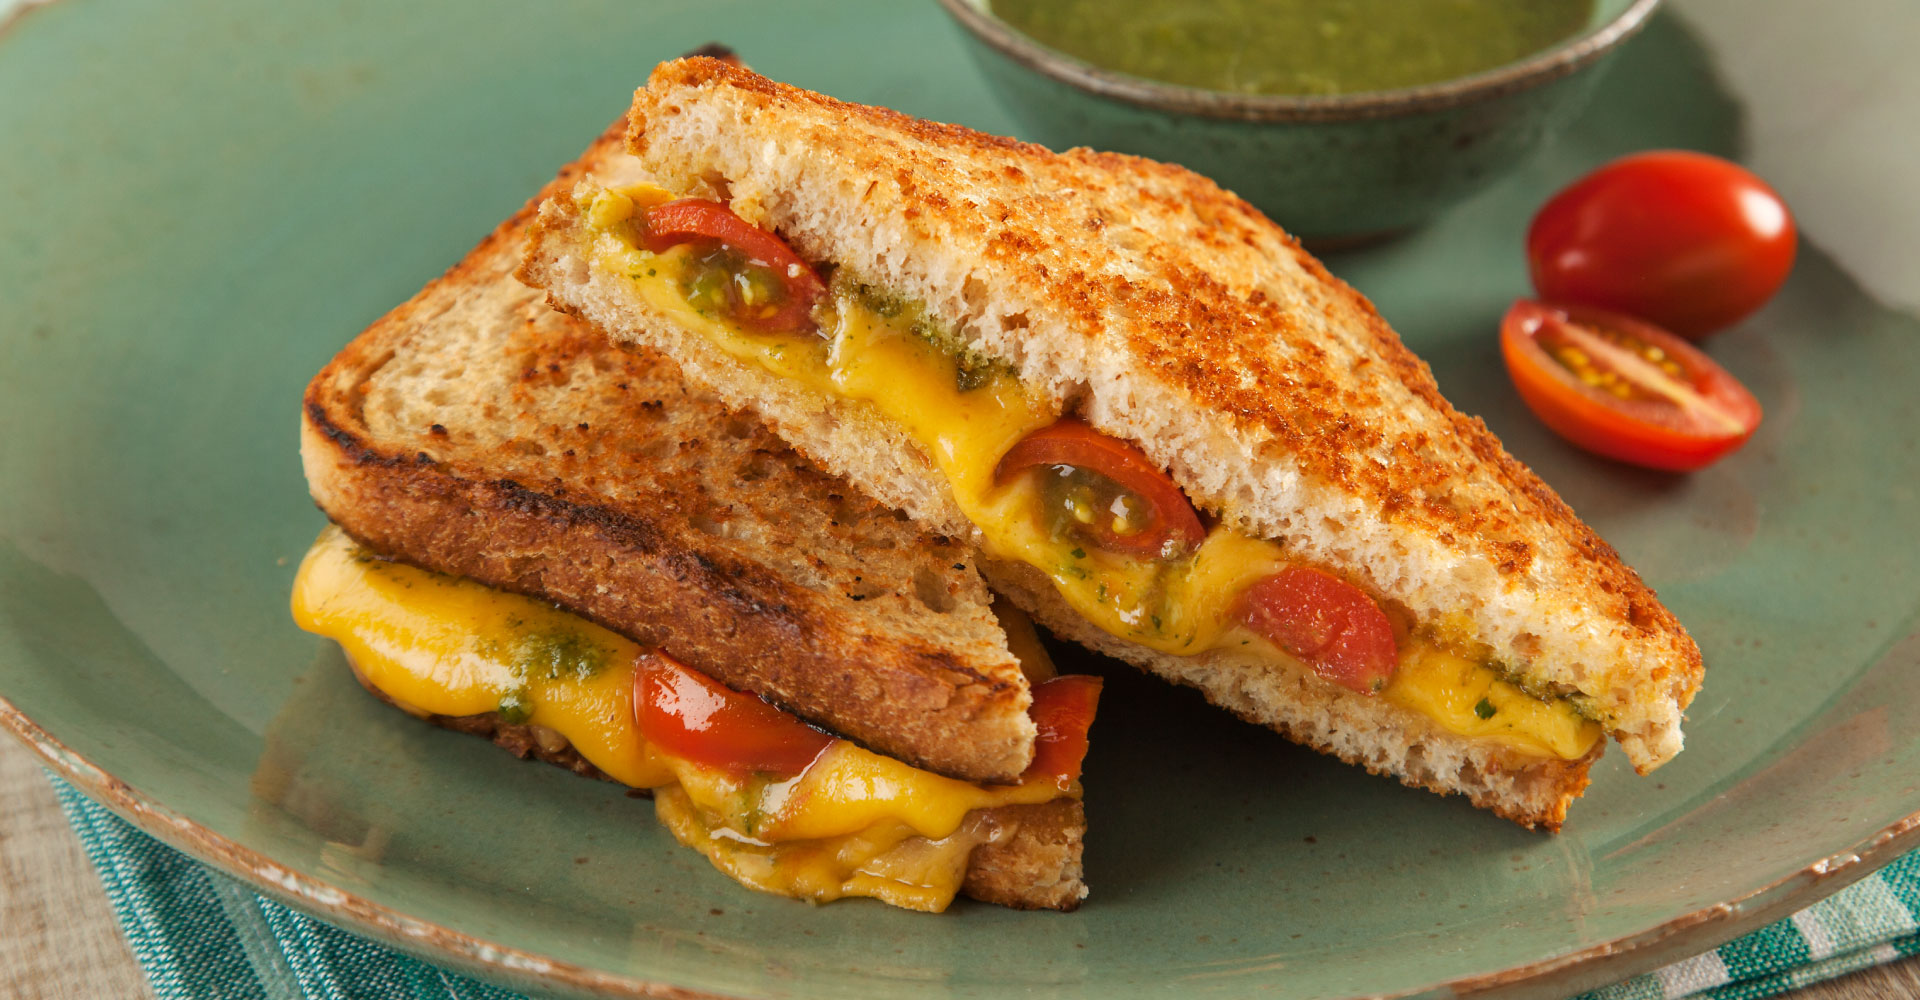 Grilled Cheese – Pesto grill